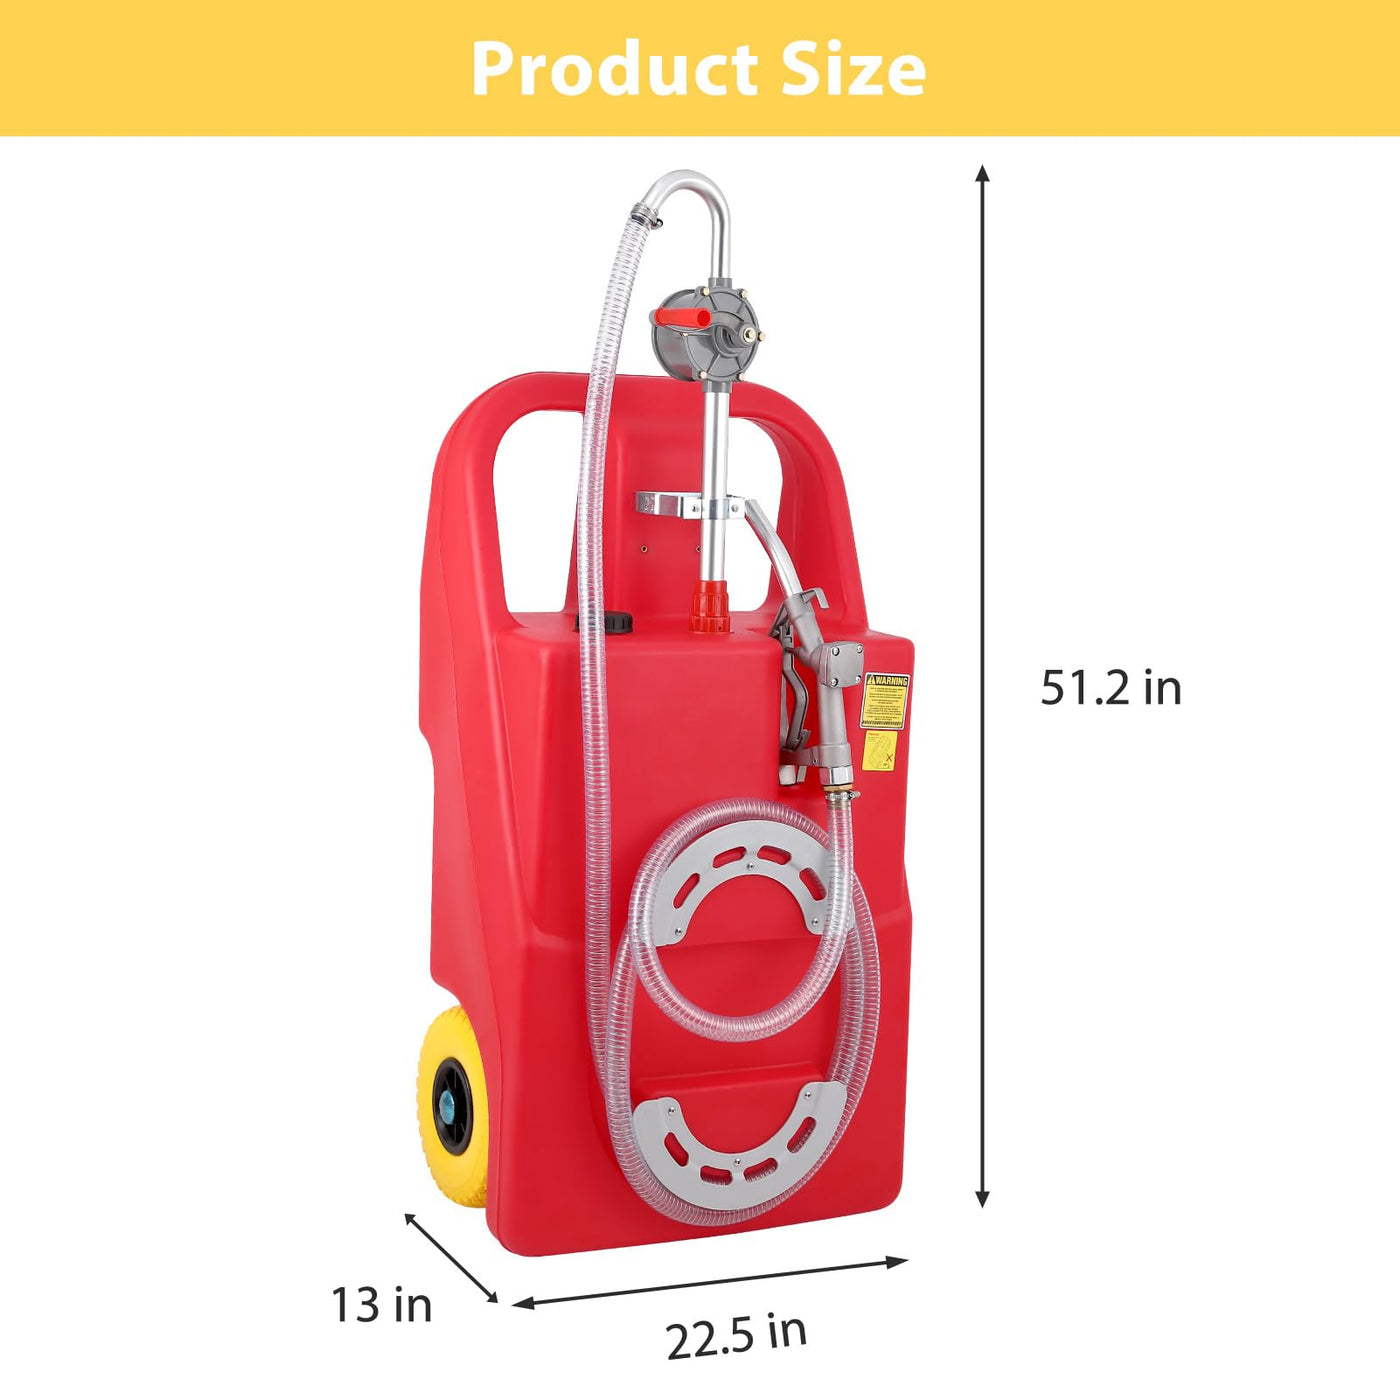 GARVEE Fuel Caddy 32 Gallon Portable Fuel Tank On Wheels With Manual Fueling Nozzle 360° Swivel Connector